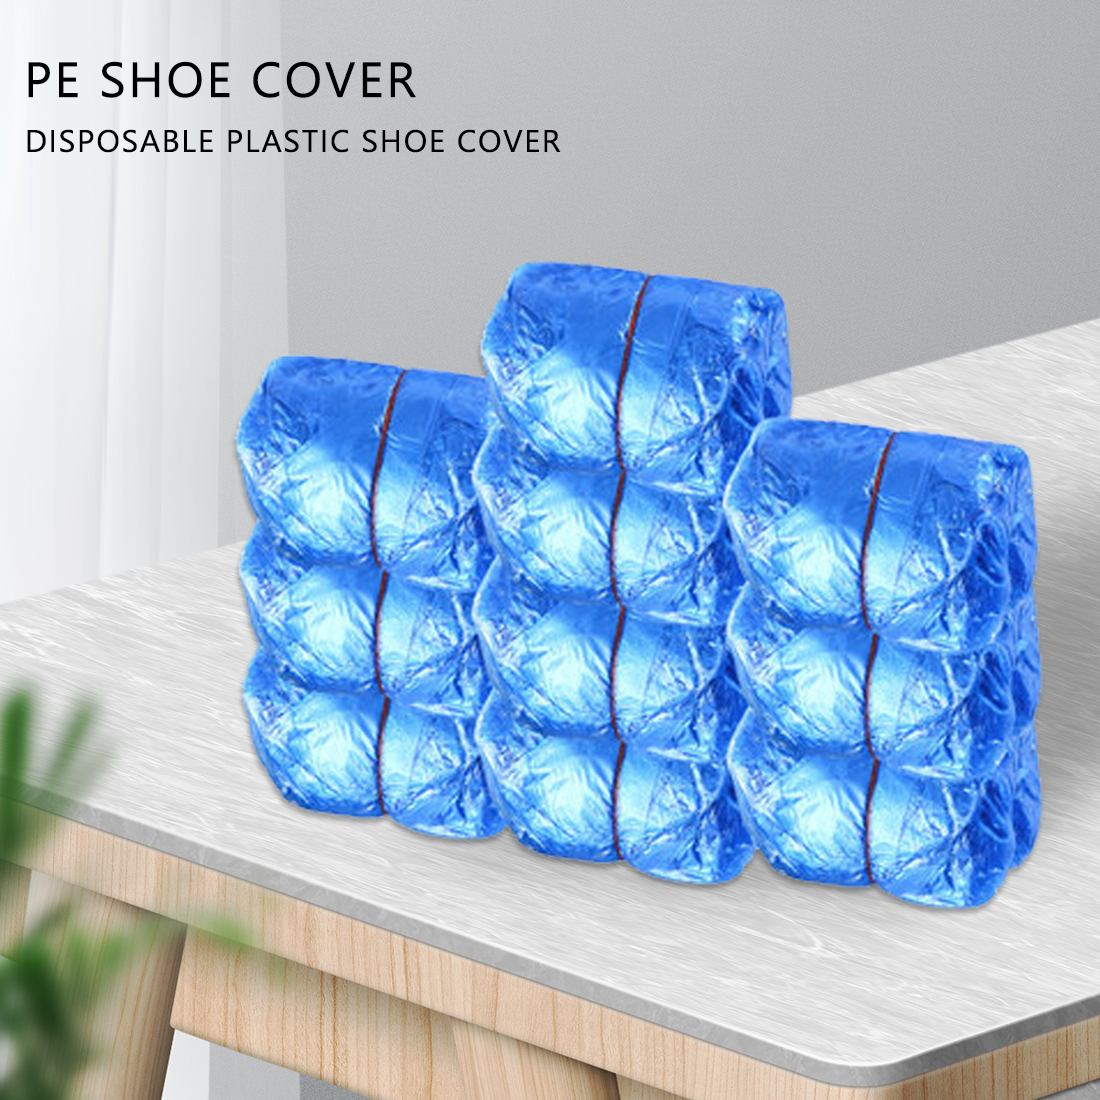 100-1000PCS Disposable Plastic Outdoor Rainy Day Carpet Cleaning Shoe Cover Blue 